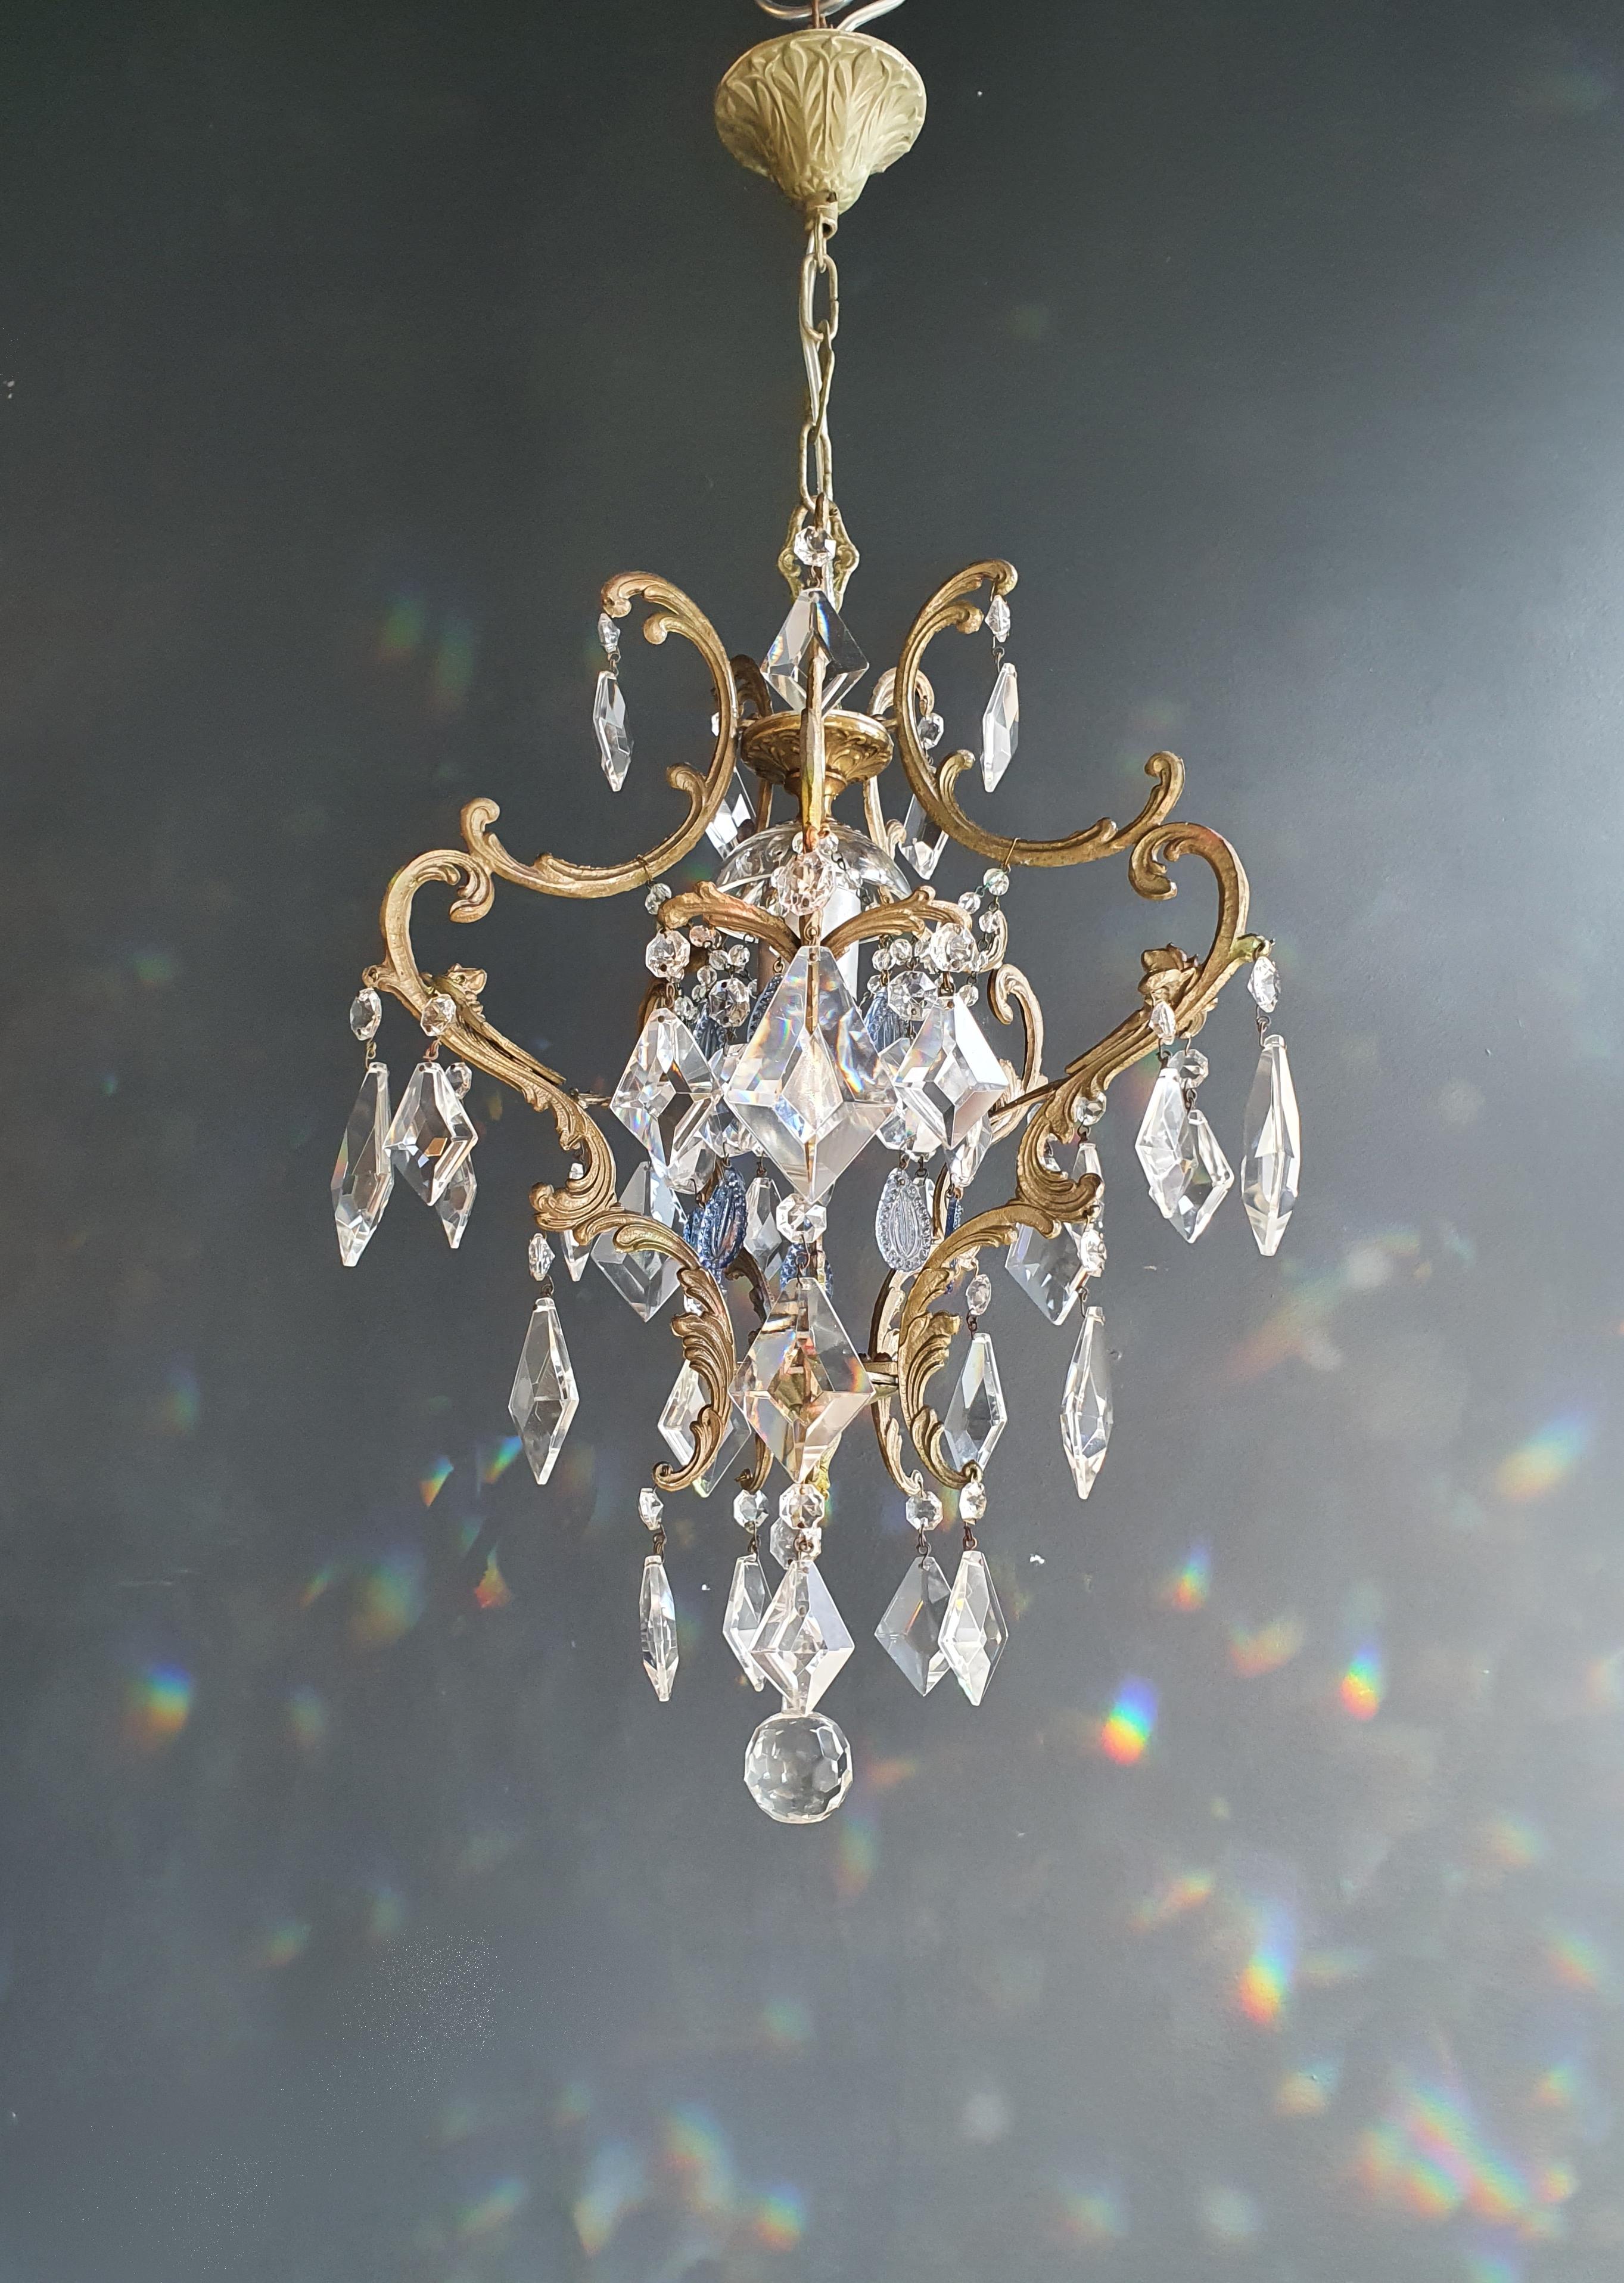 Authentic Preserved Chandelier from the 1940s: Impeccably Restored and Revitalized

Step into the past with this original preserved chandelier, circa 1940. Meticulously restored, it embodies the timeless elegance of a bygone era while seamlessly